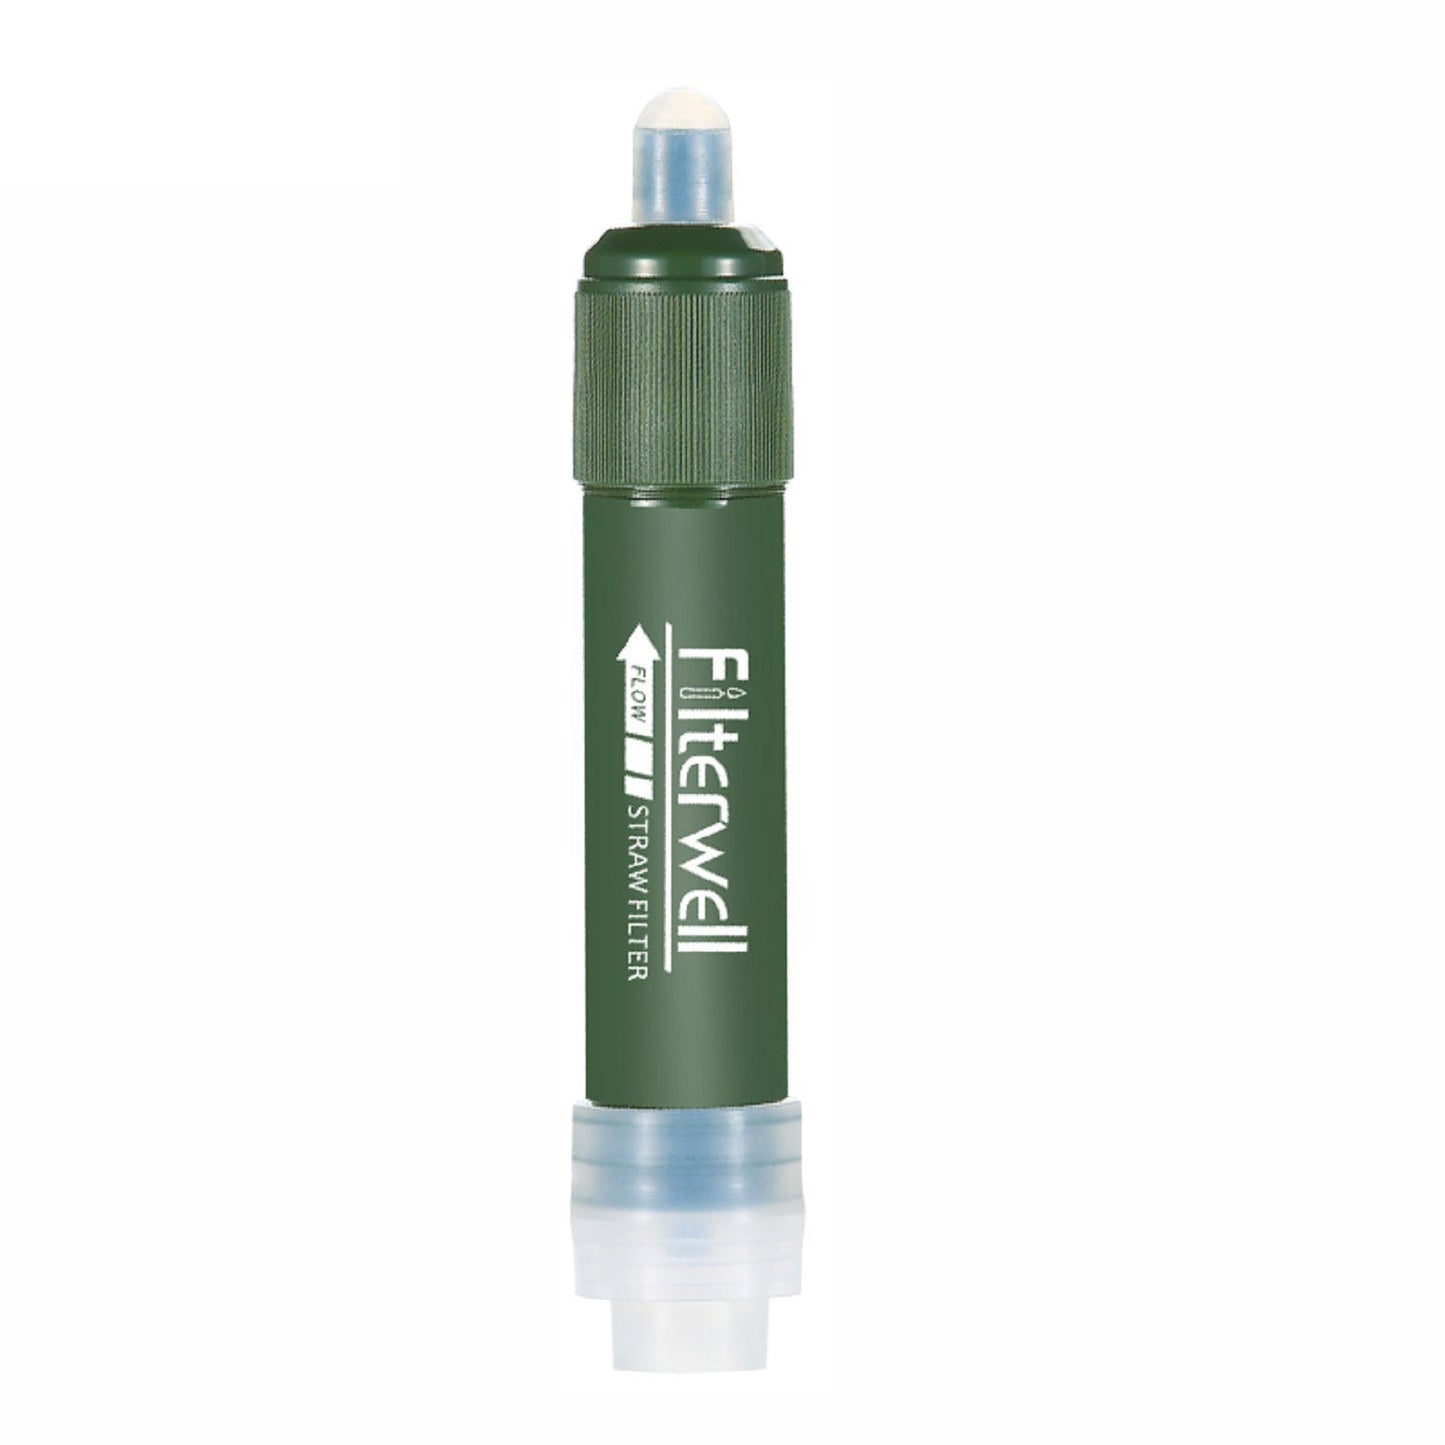 Mini Camping Purification Water Filter Water Bag for Survival or Emergency Supplies